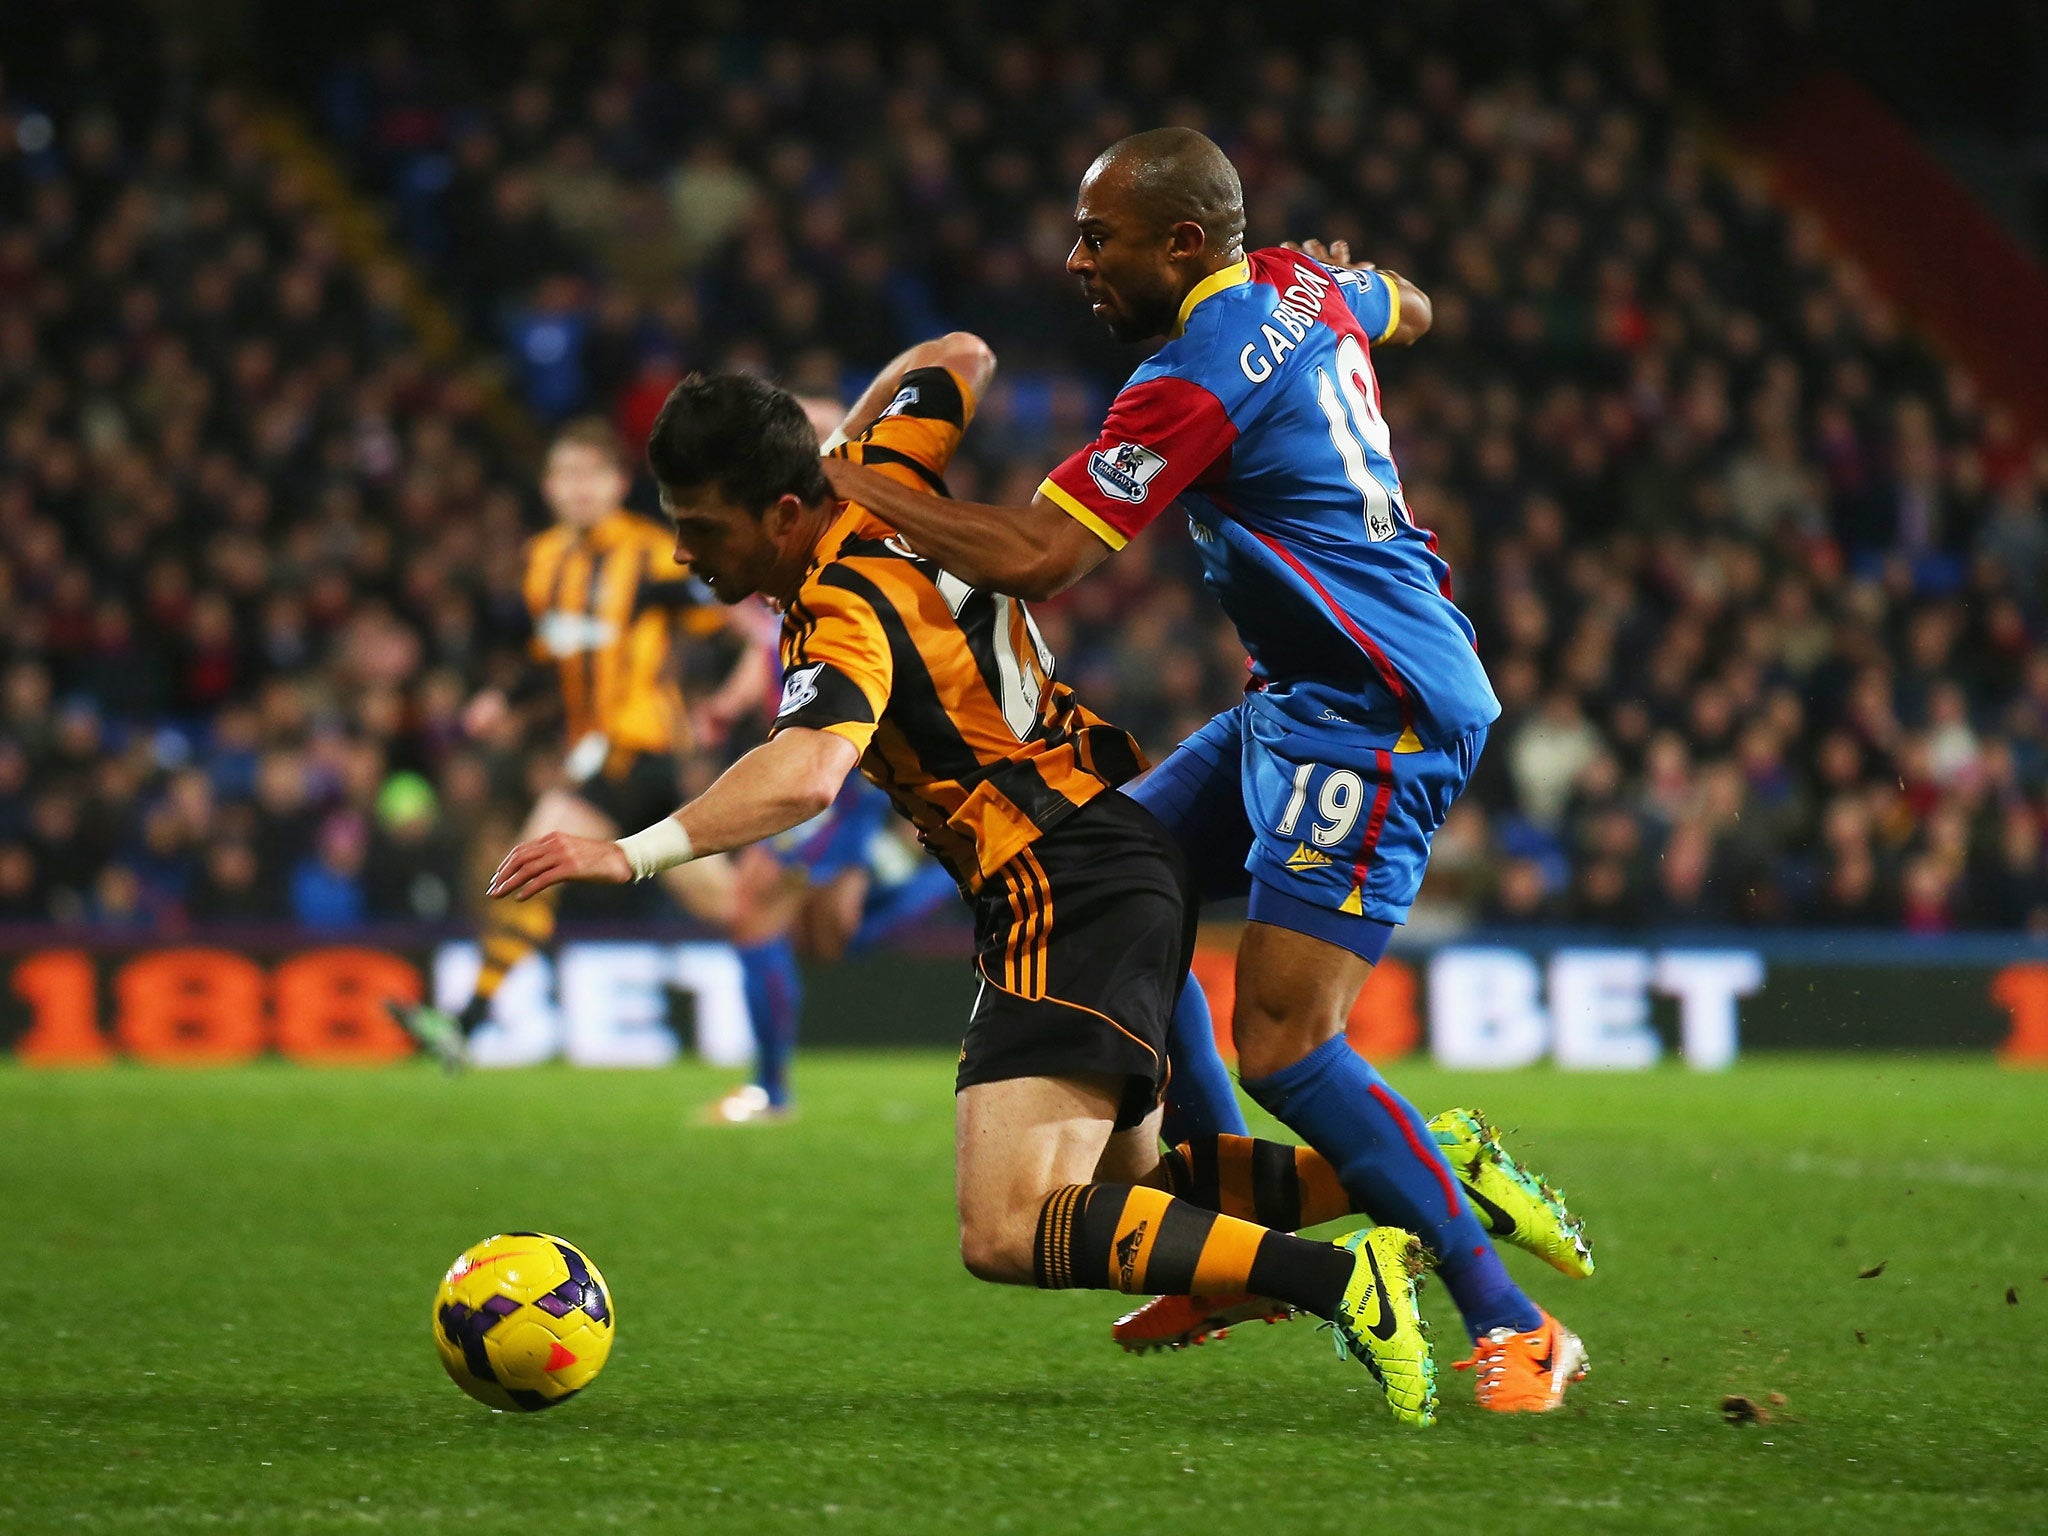 Shane Long of Hull City goes to ground after a challenge by Danny Gabbidon of Crystal Palace